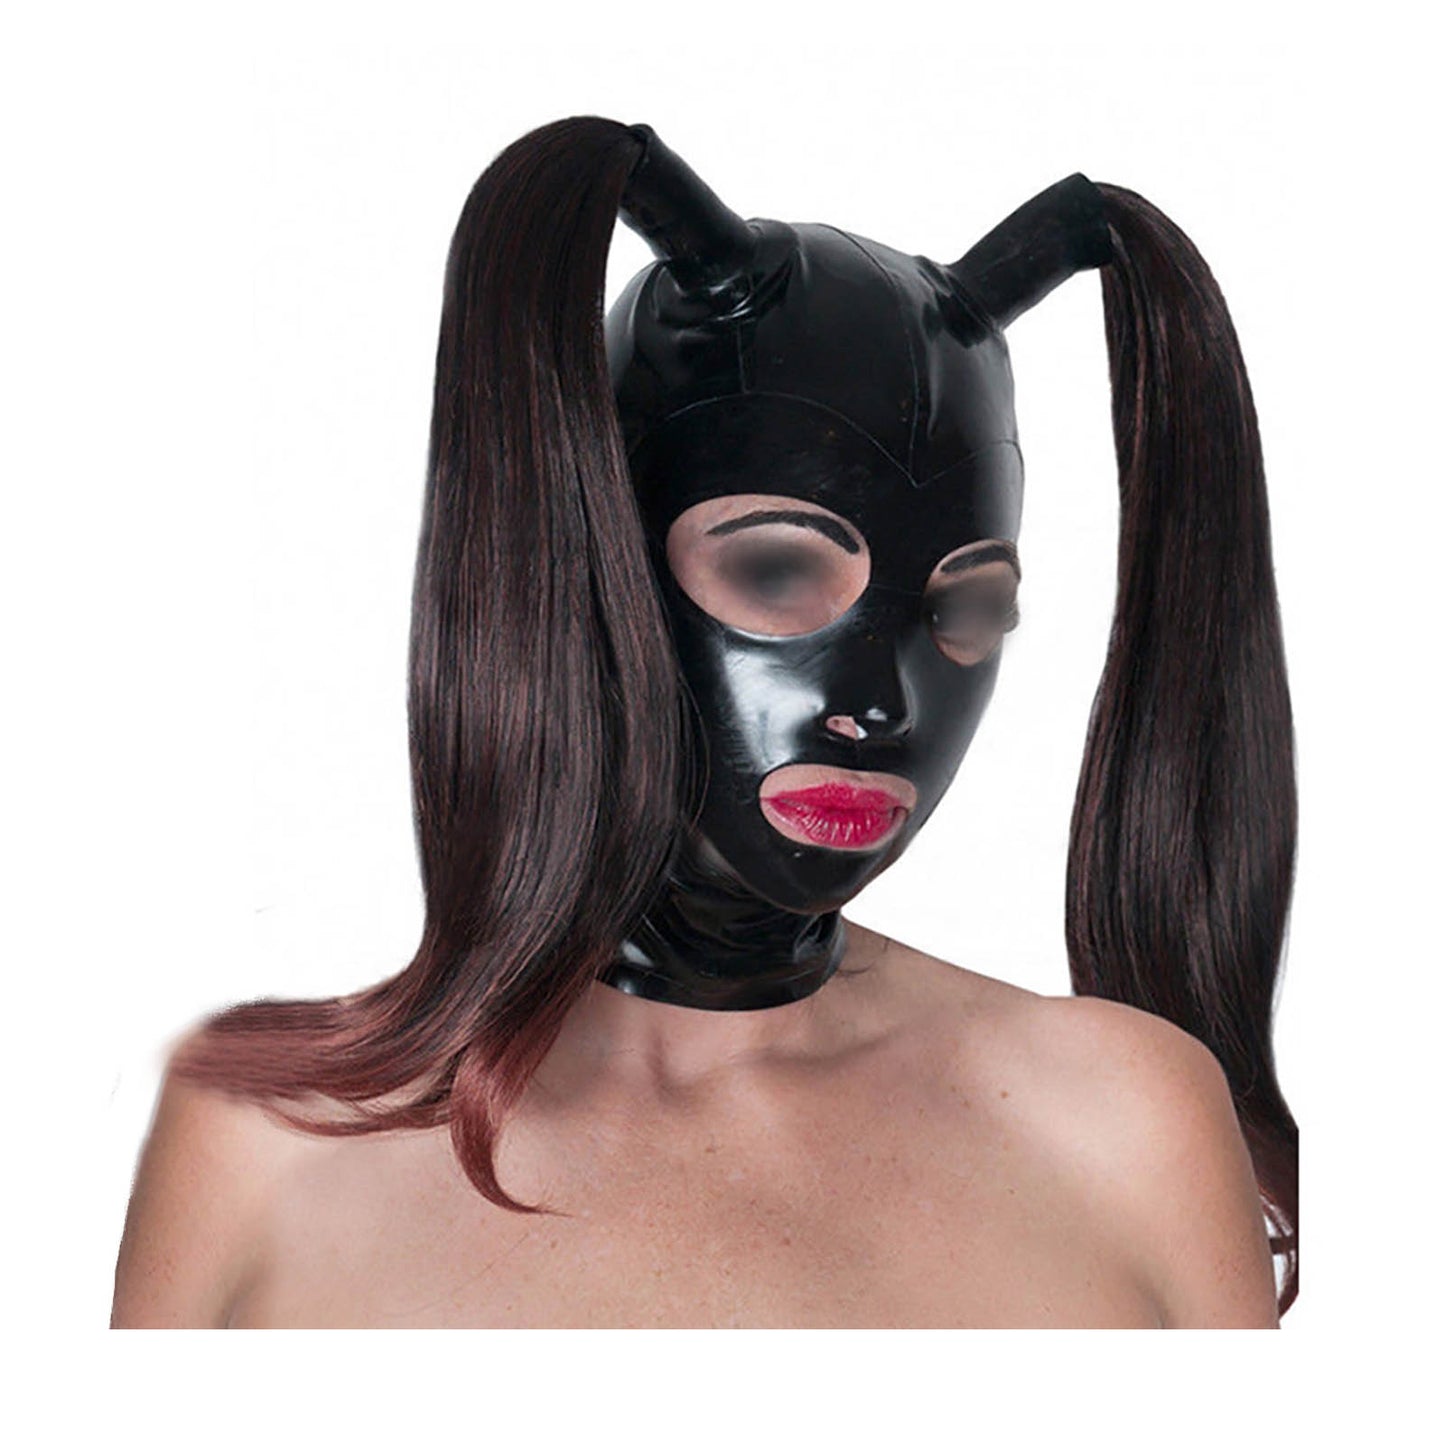 MONNIK Full Cover Latex Hood Rubber Two Ponytails Tubes Mask with Rear Zipper Handmade for Catsuit Cosplay